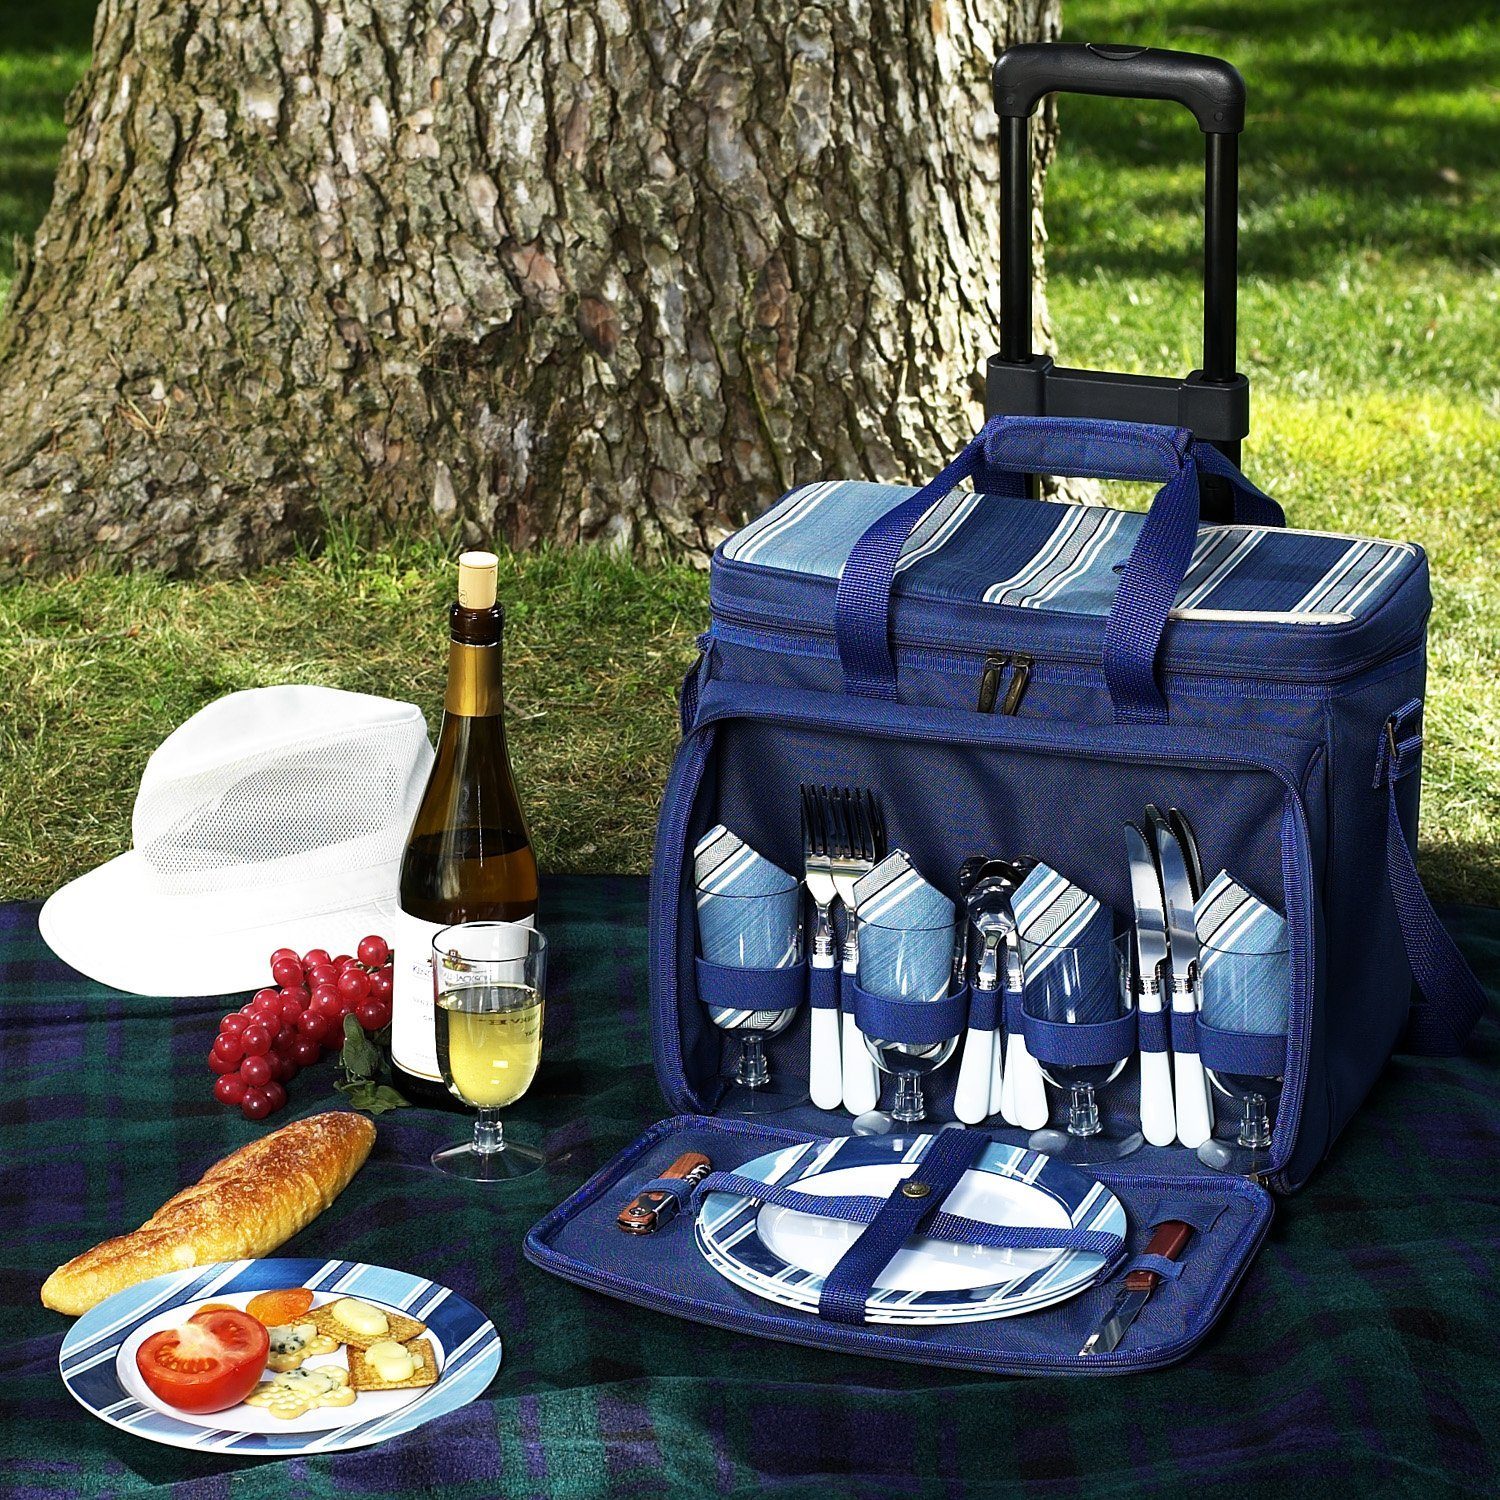 Picnic Sets – Best Picnic Baskets and Supplies – picnic kit — Eatwell101